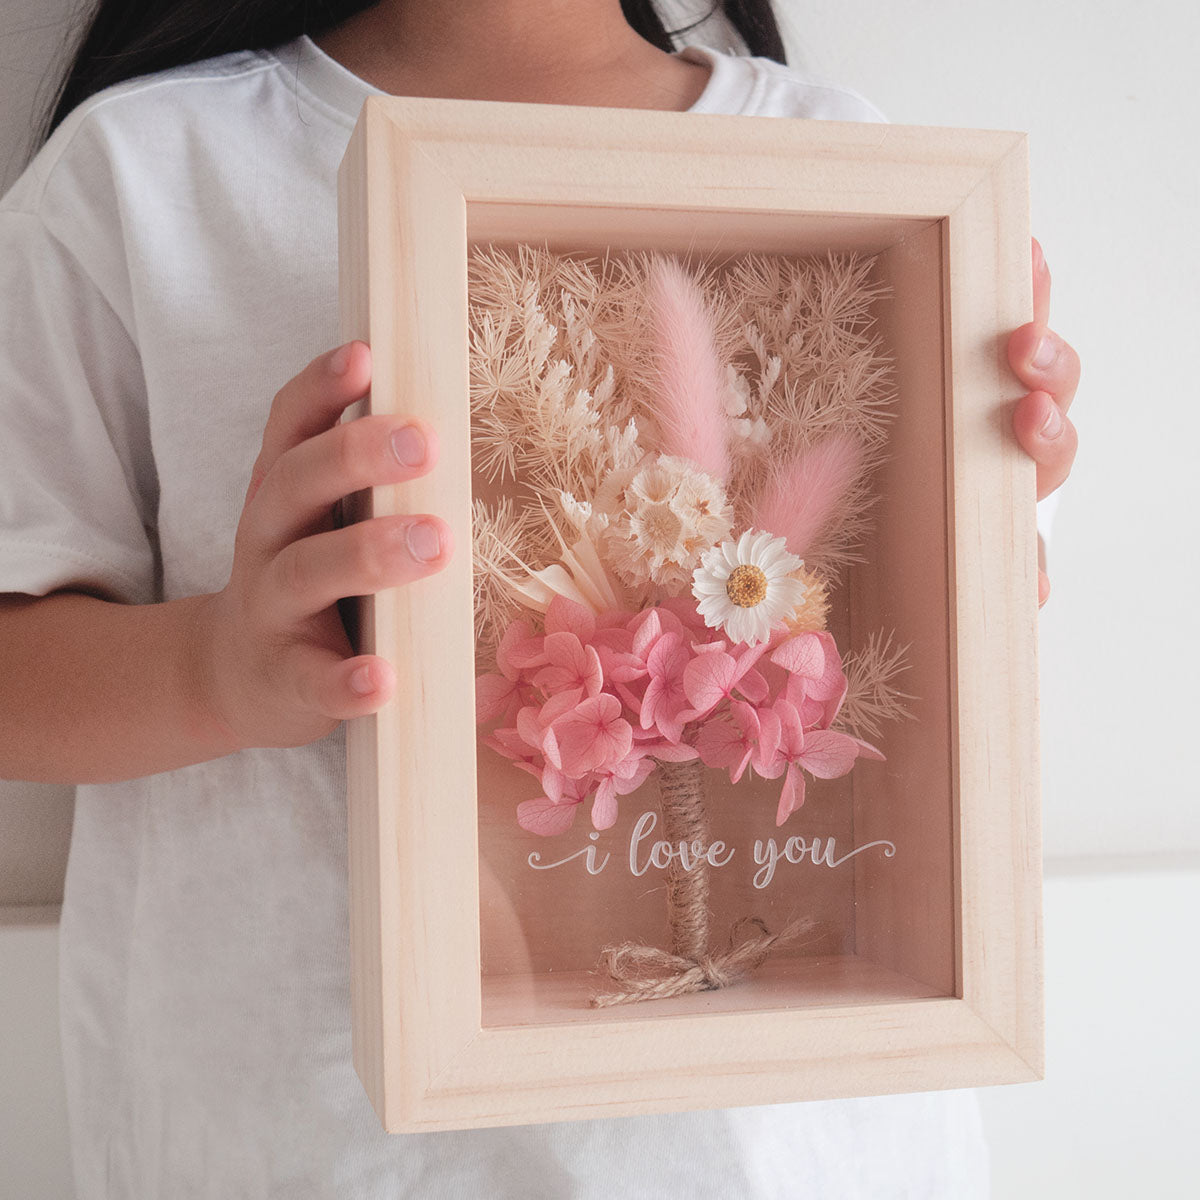 This is a wooden flower box with dried  pink  and white flowers and  grass. This is a front view with thext "i love you". A little girl is holding the box